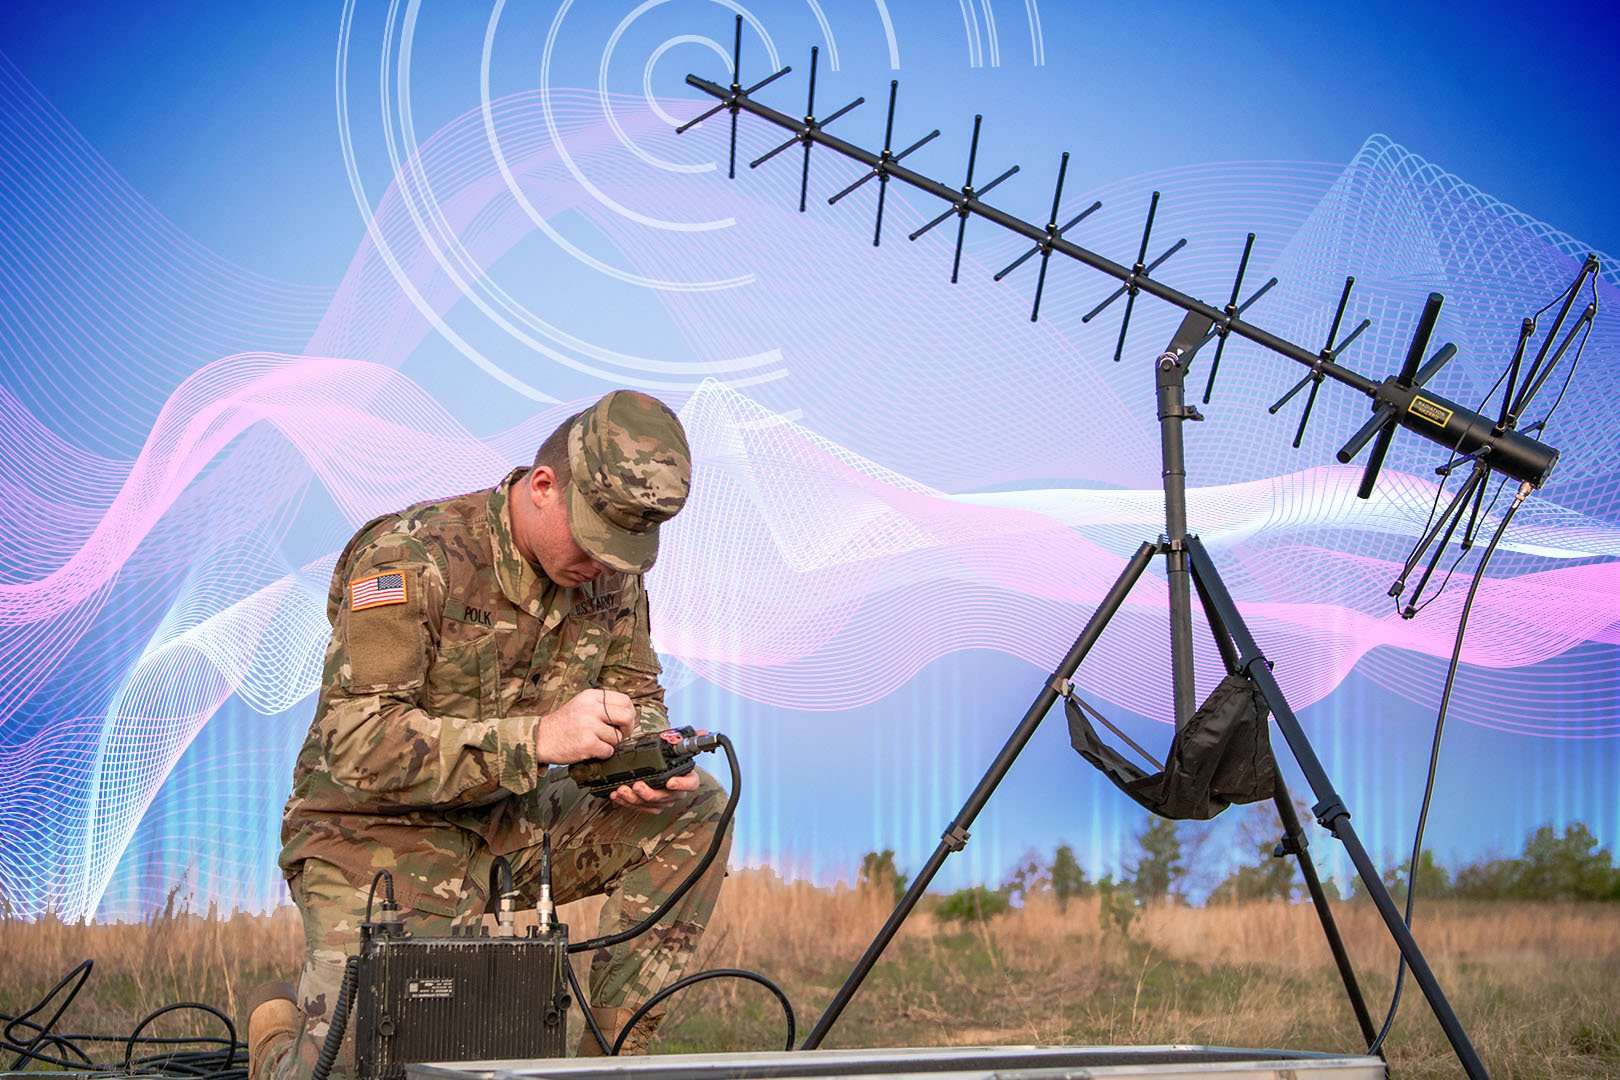 Photo of a military man in uniform using a mobile communications device